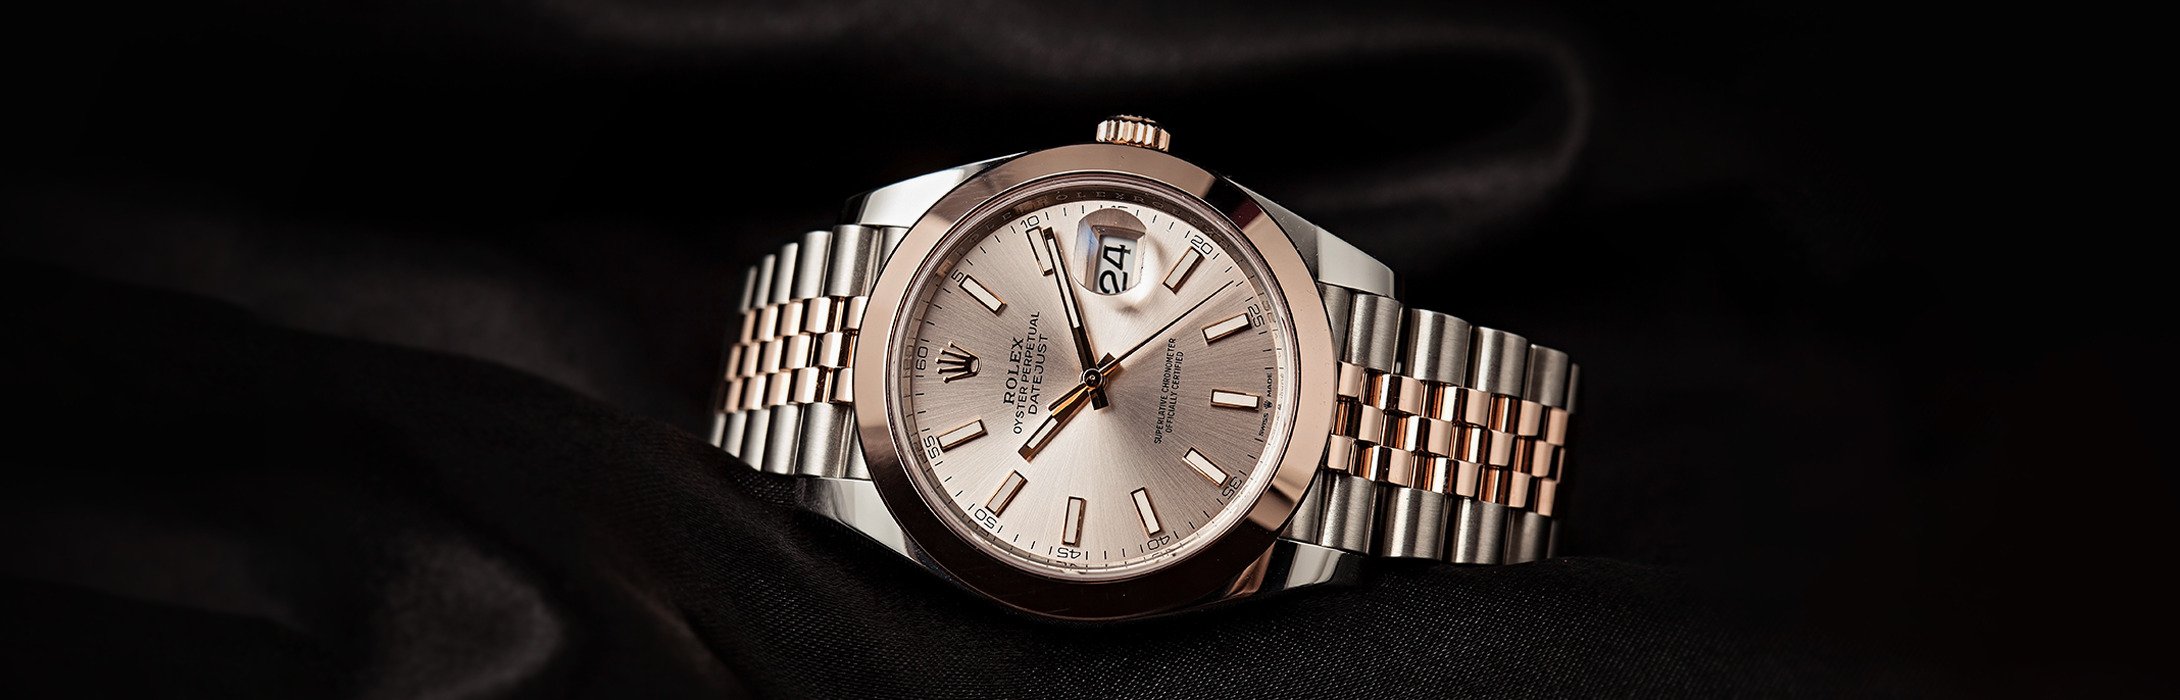 Rolex Two-Tone Datejust Ultimate Buying Guide